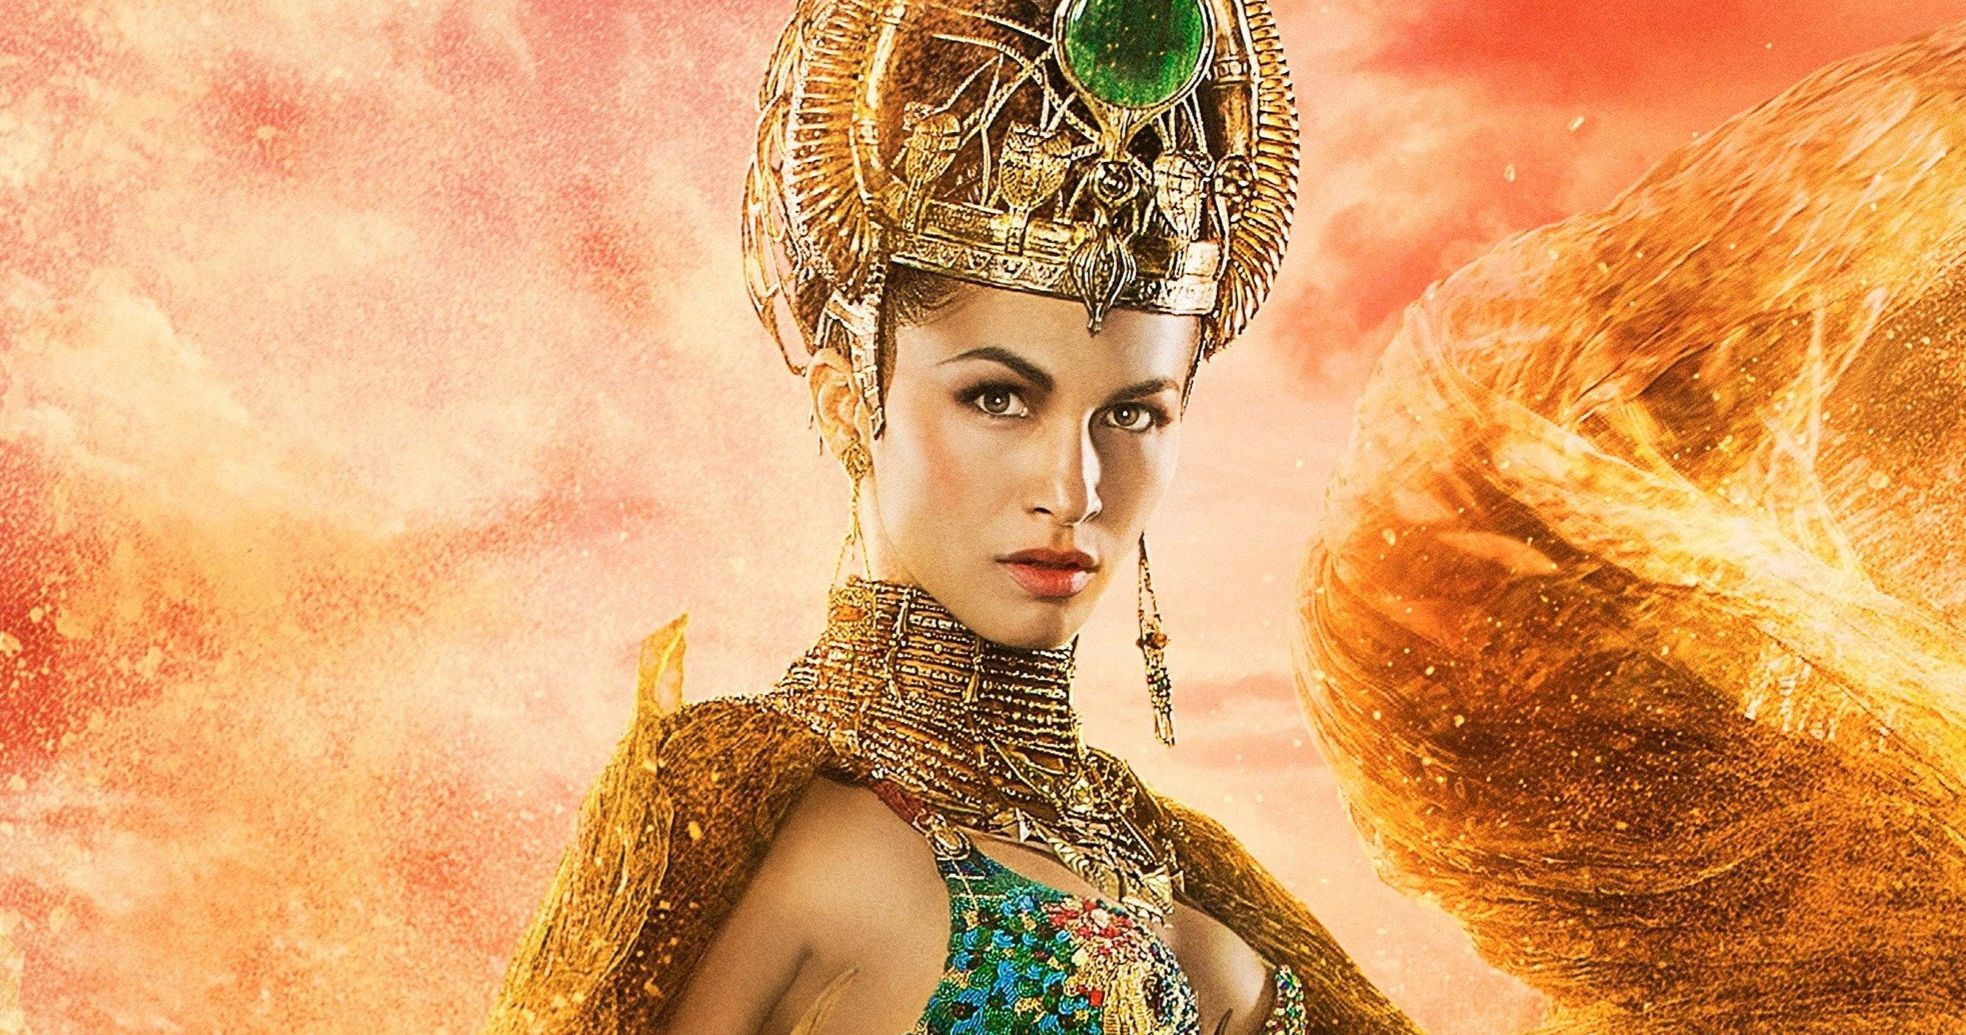 Elodie Yung Boards Gods of Egypt